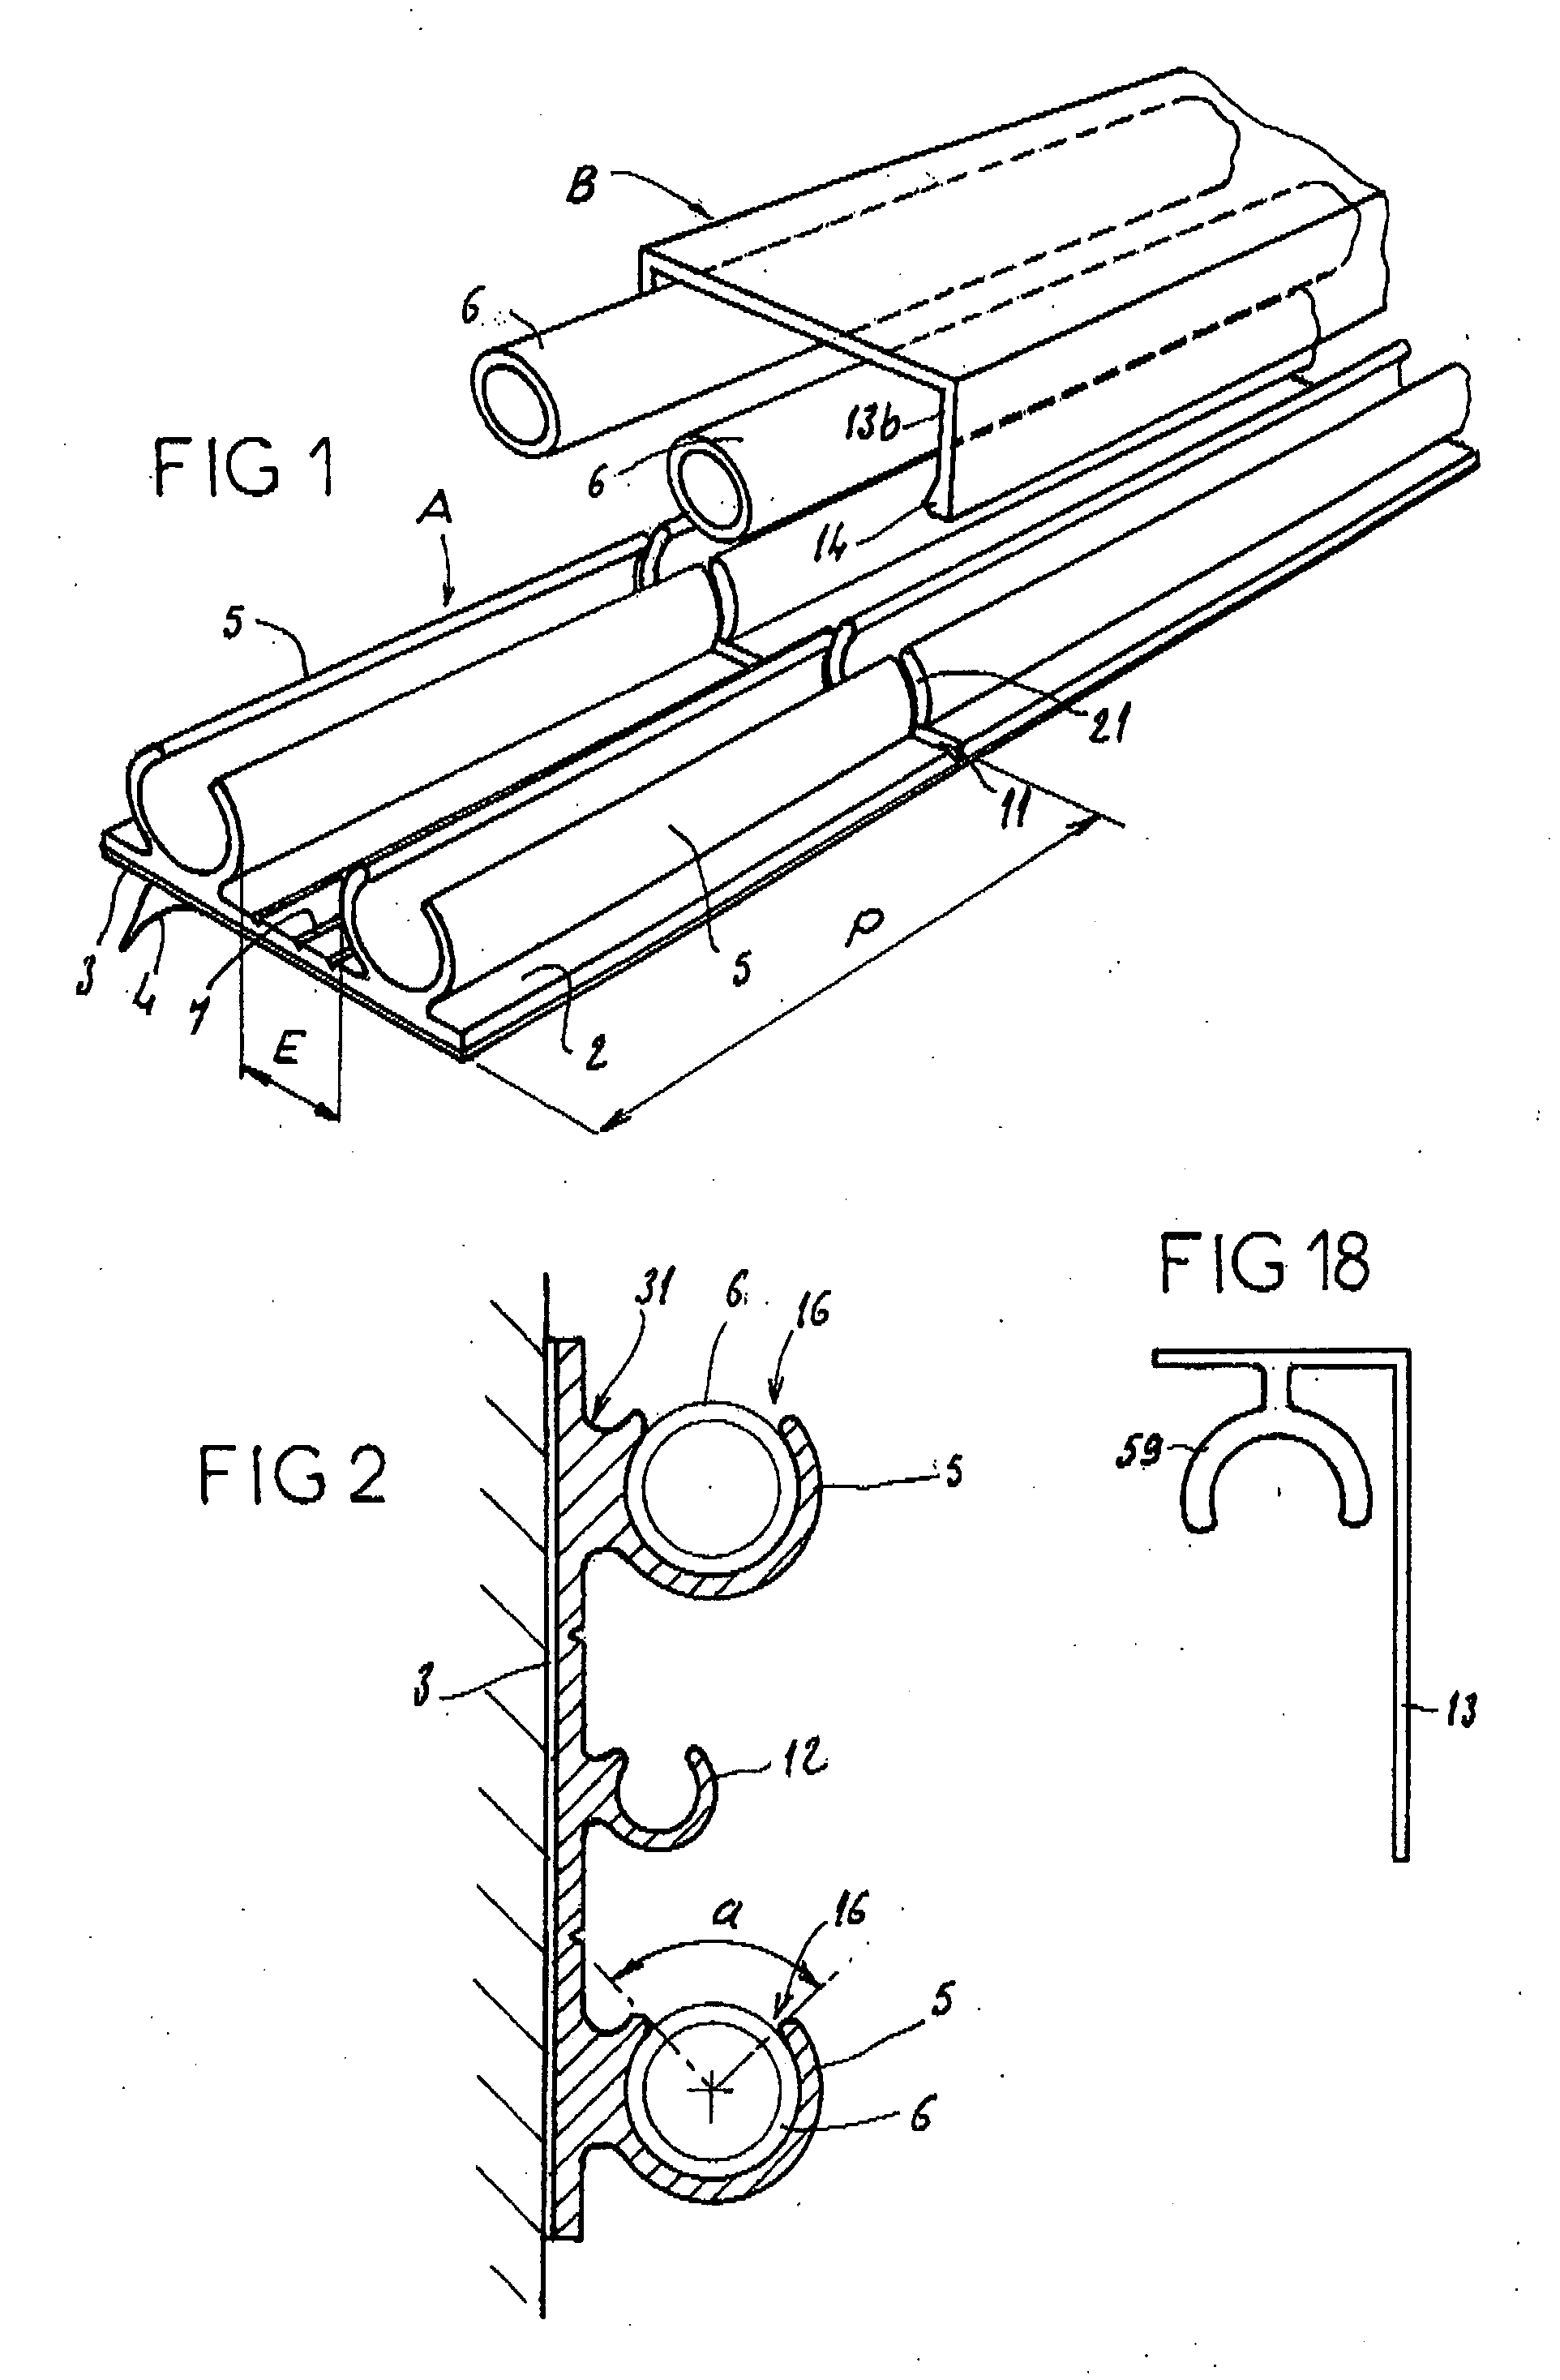 Device for laying and fixing pipes for various circuits, domestic or industrial